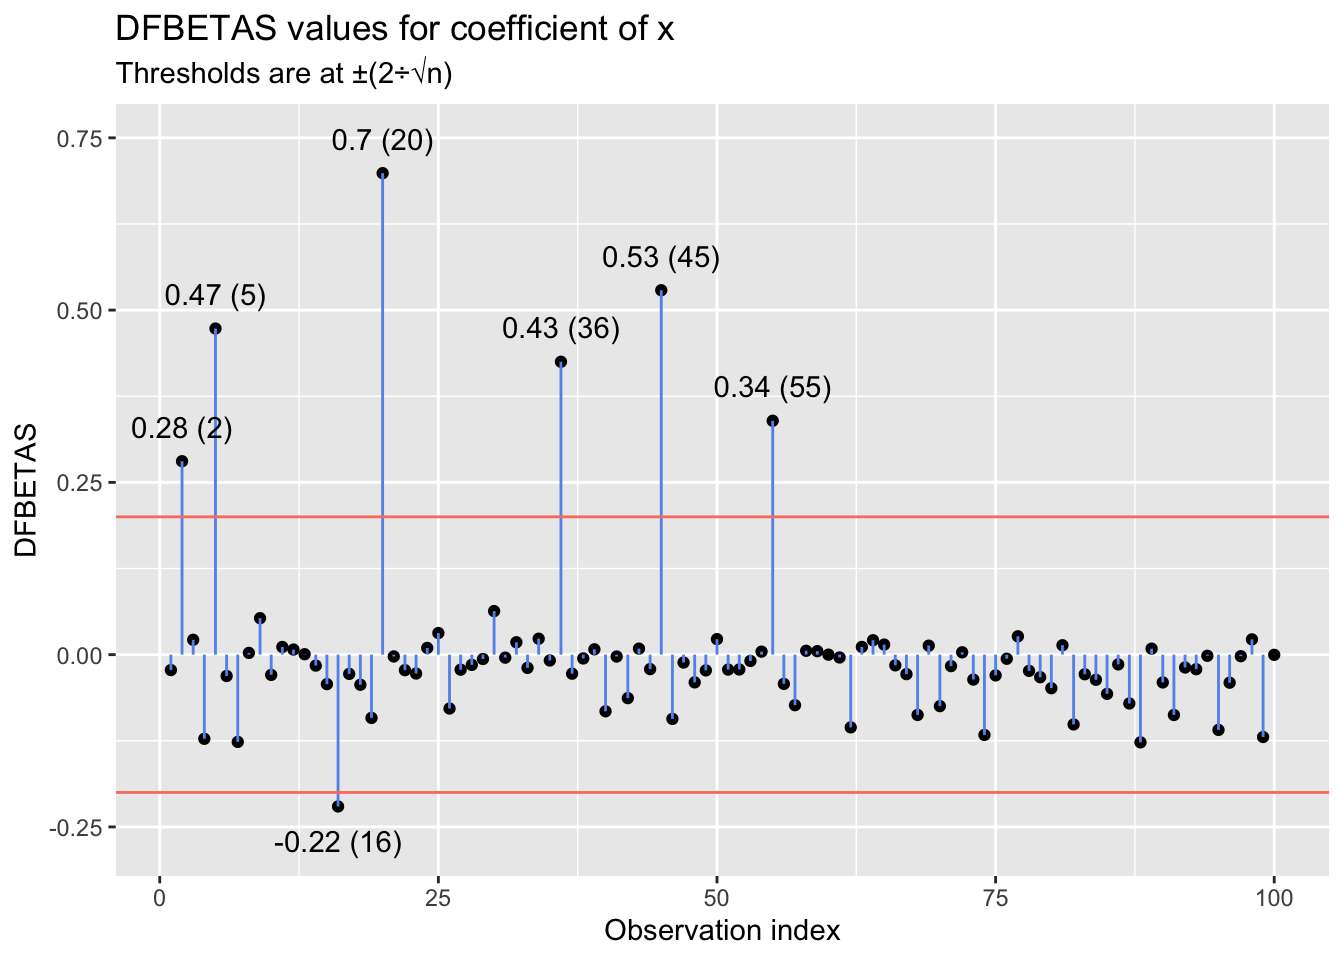 dfbetas values for coefficient of x plotted against a threshold of plus or minus 2 divided by the square root of n